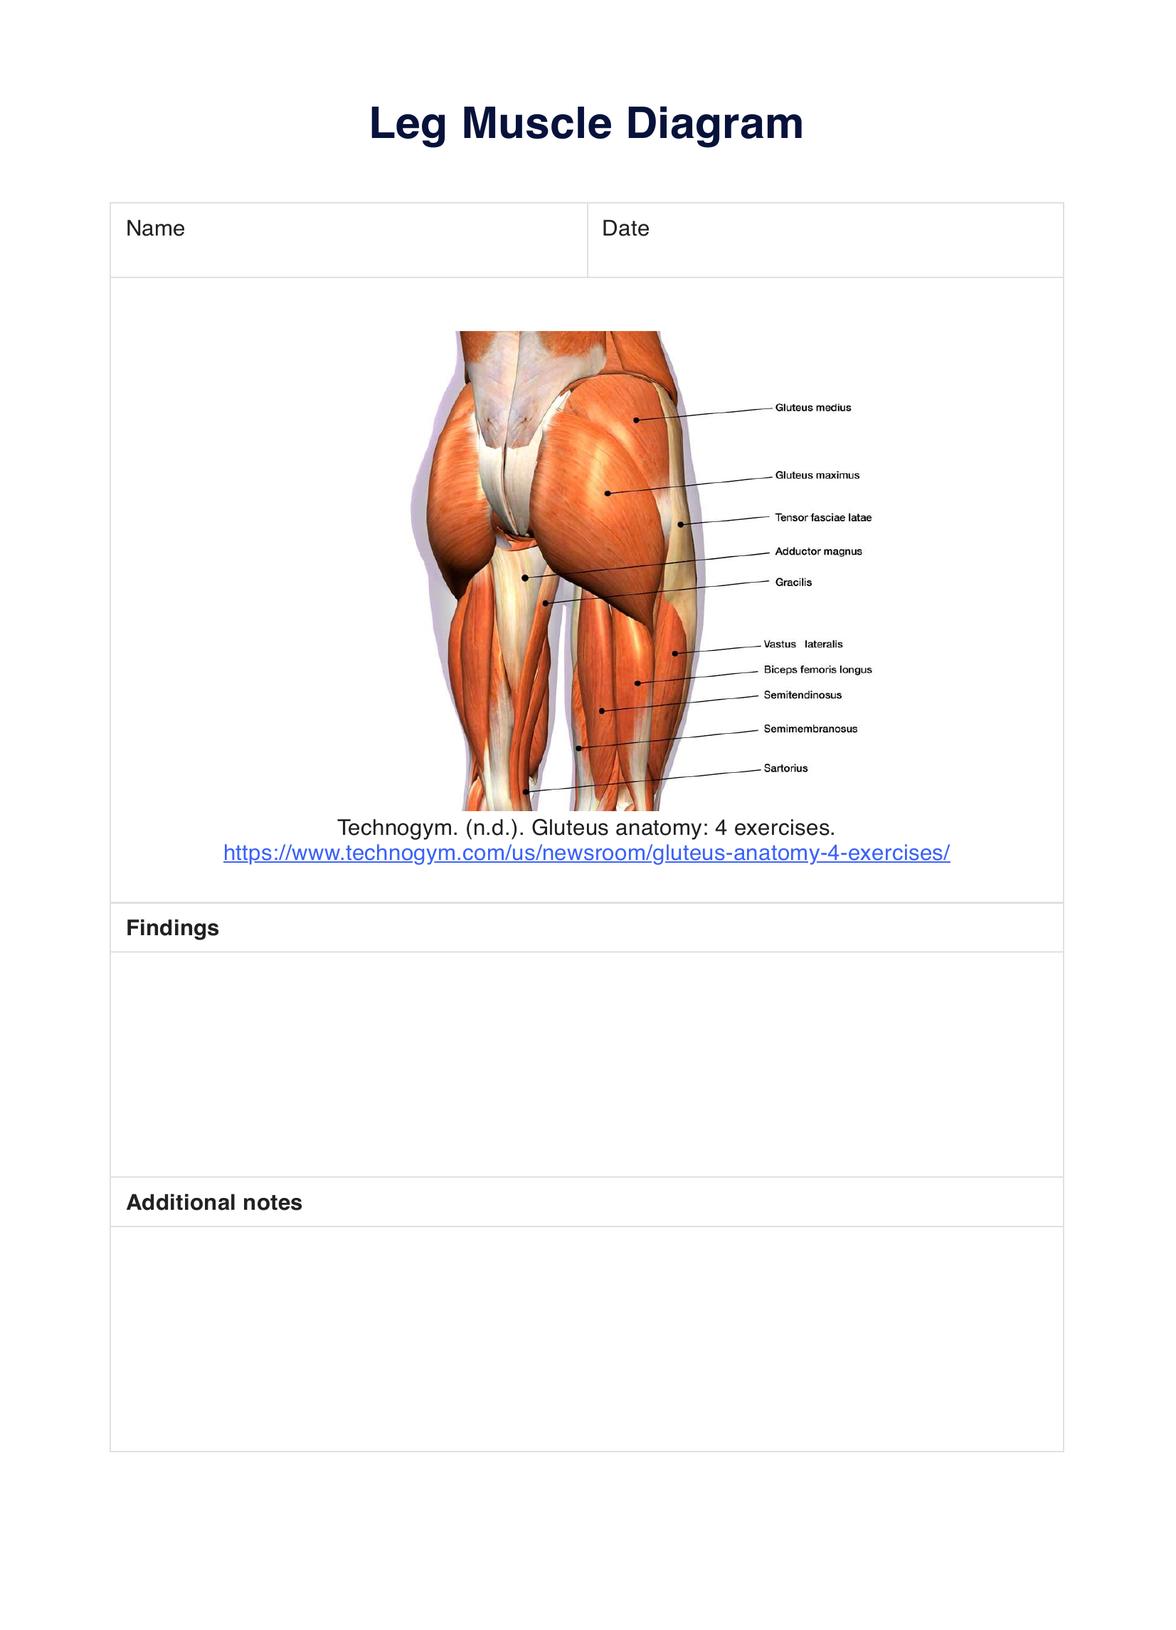 Glute Muscle Diagram PDF Example